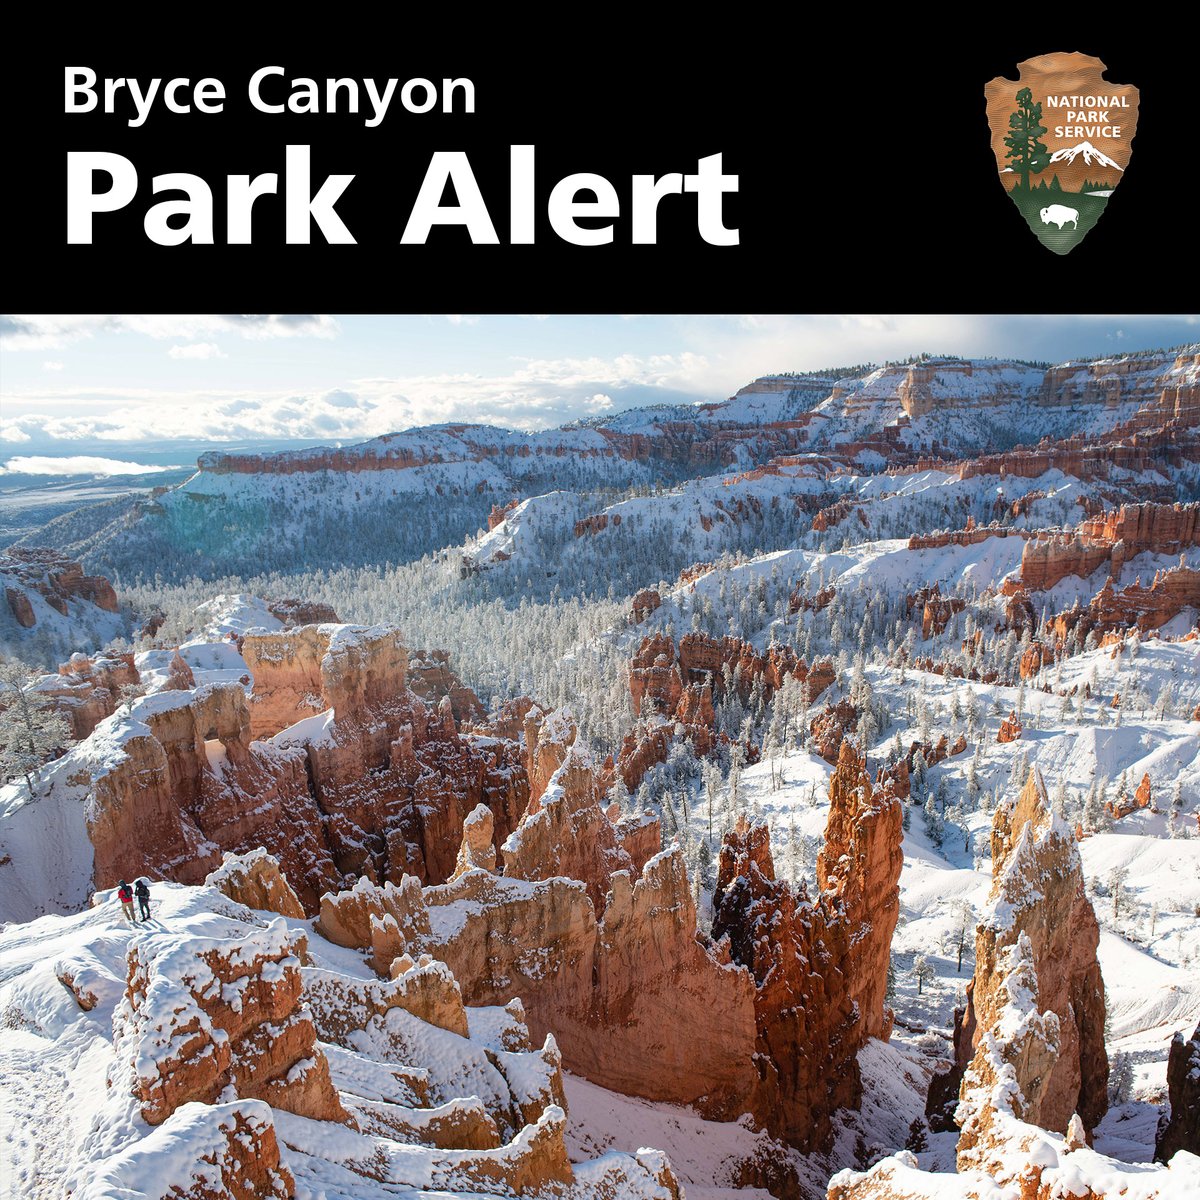 The main park road is fully open to Rainbow Point (Mile 18 of 18). During snowstorms the road may temporarily close at Mile 3 for snowplow operations.